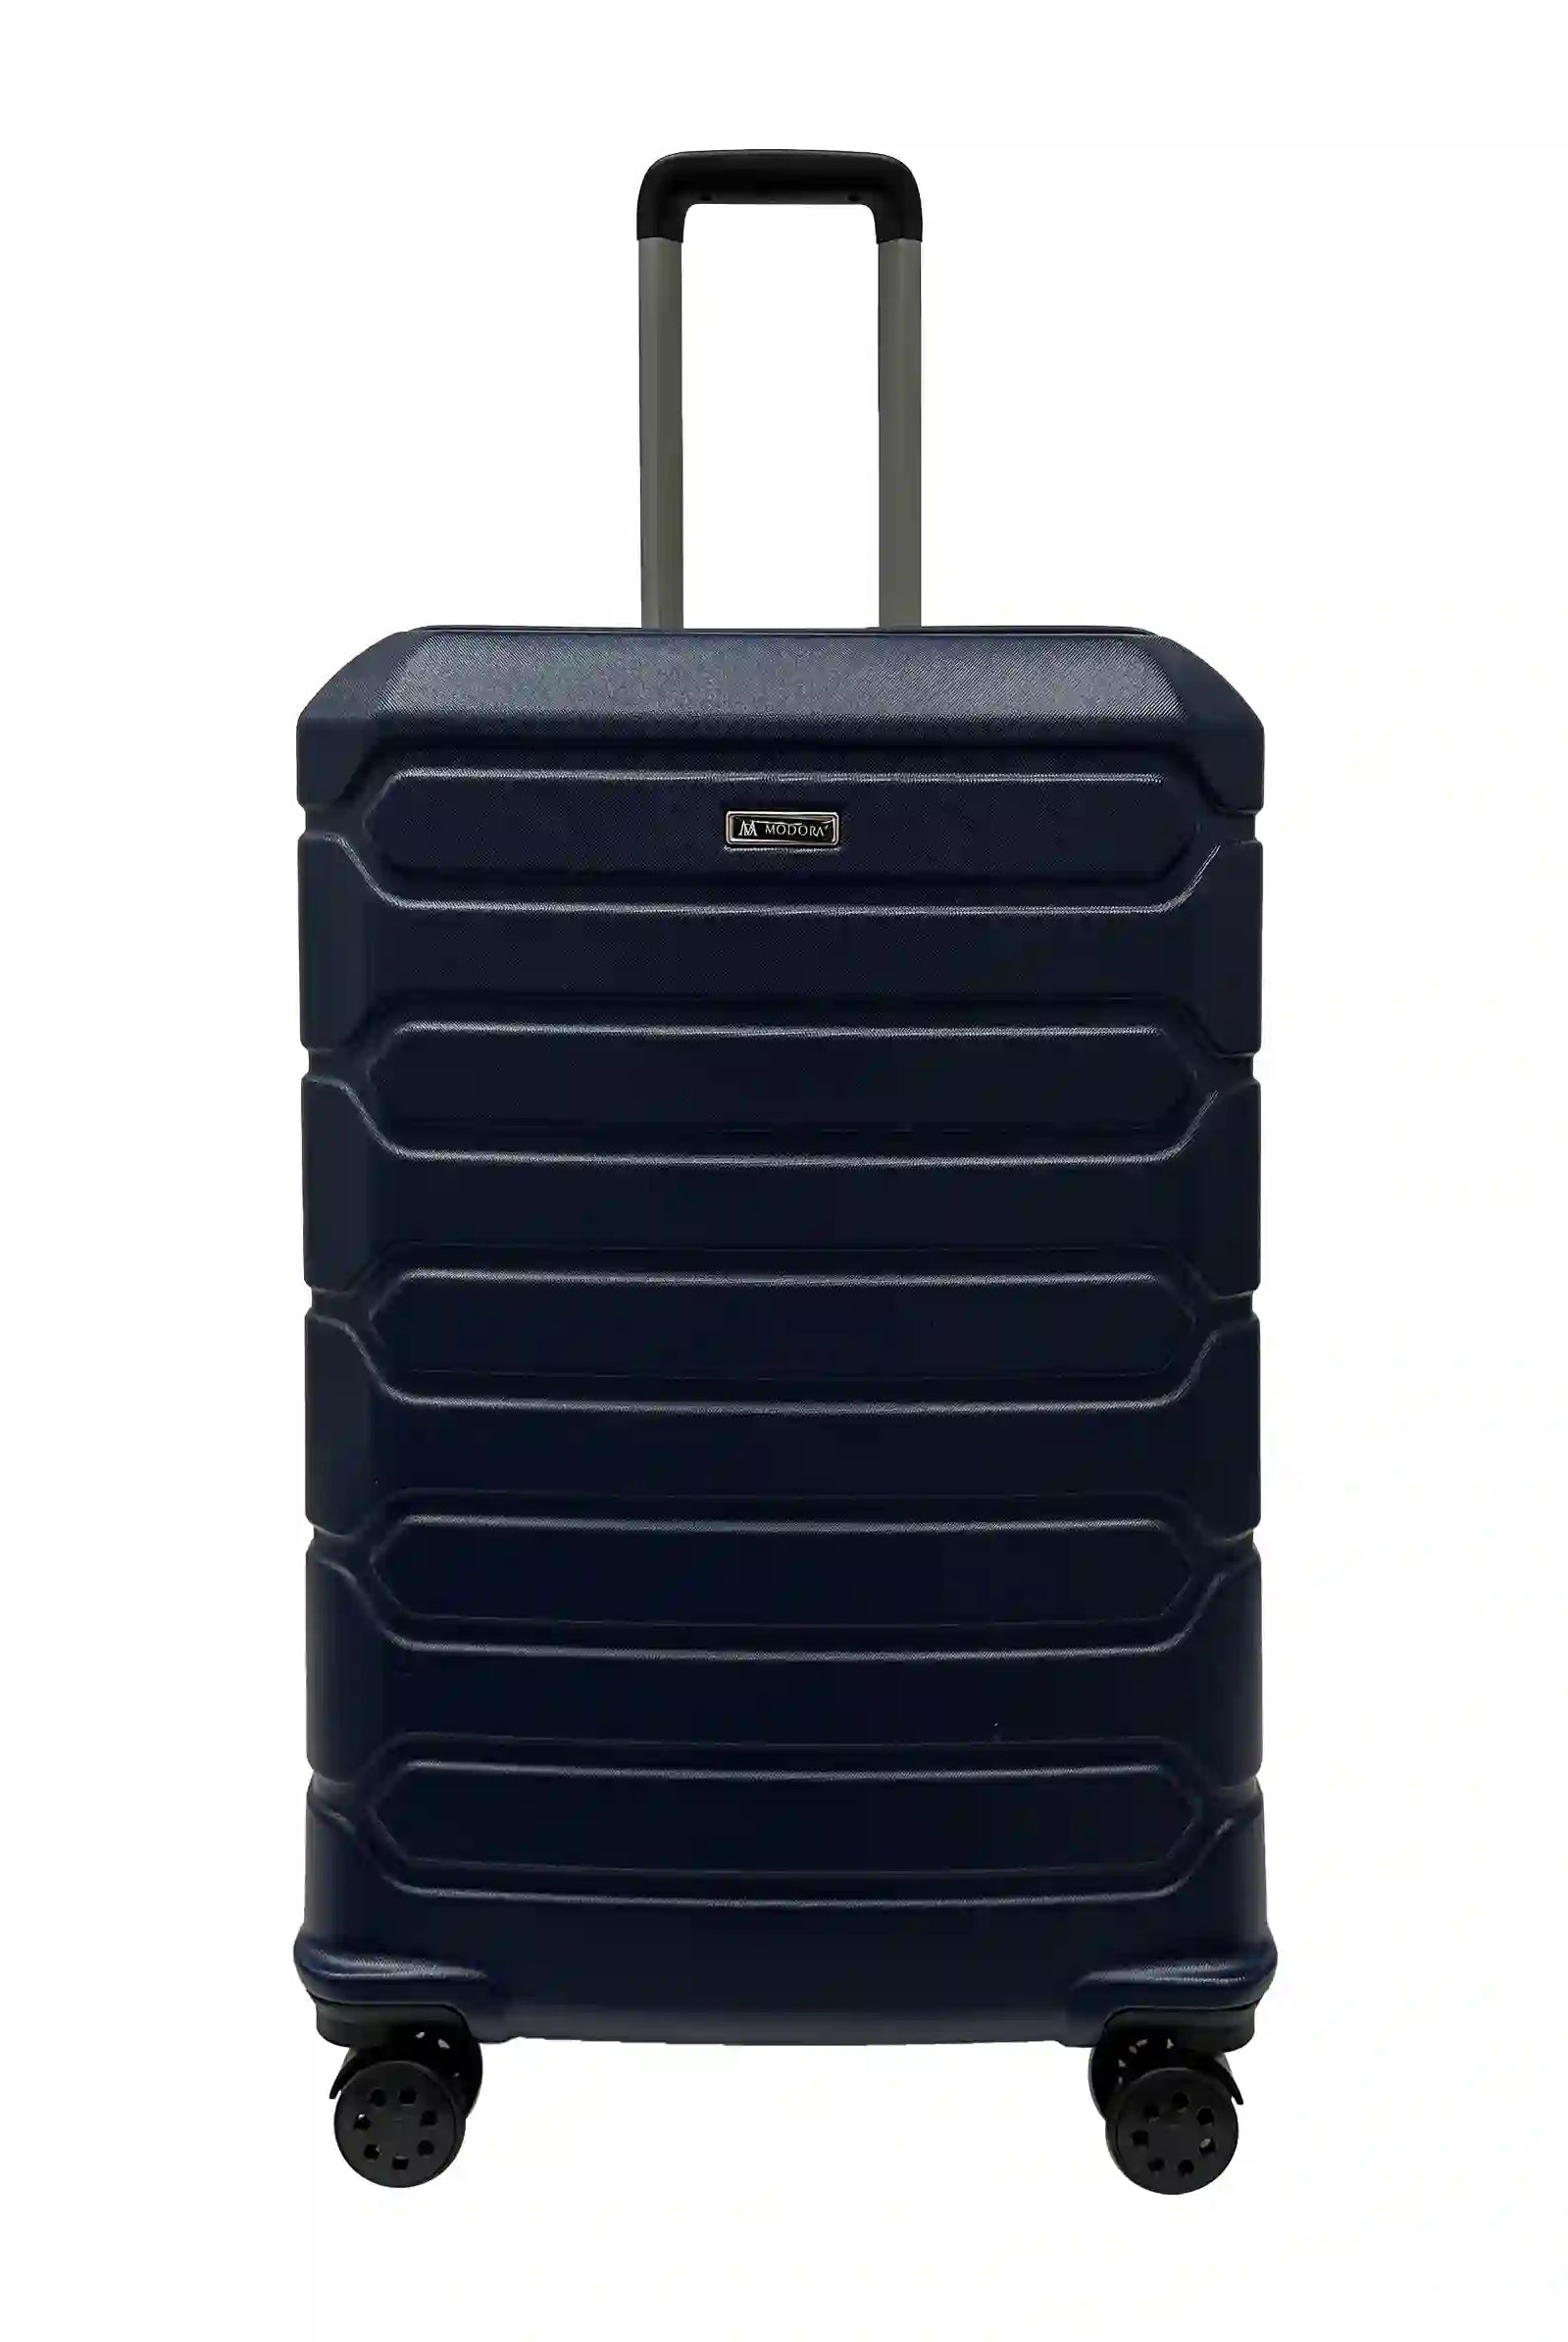 Navy carry on luggage